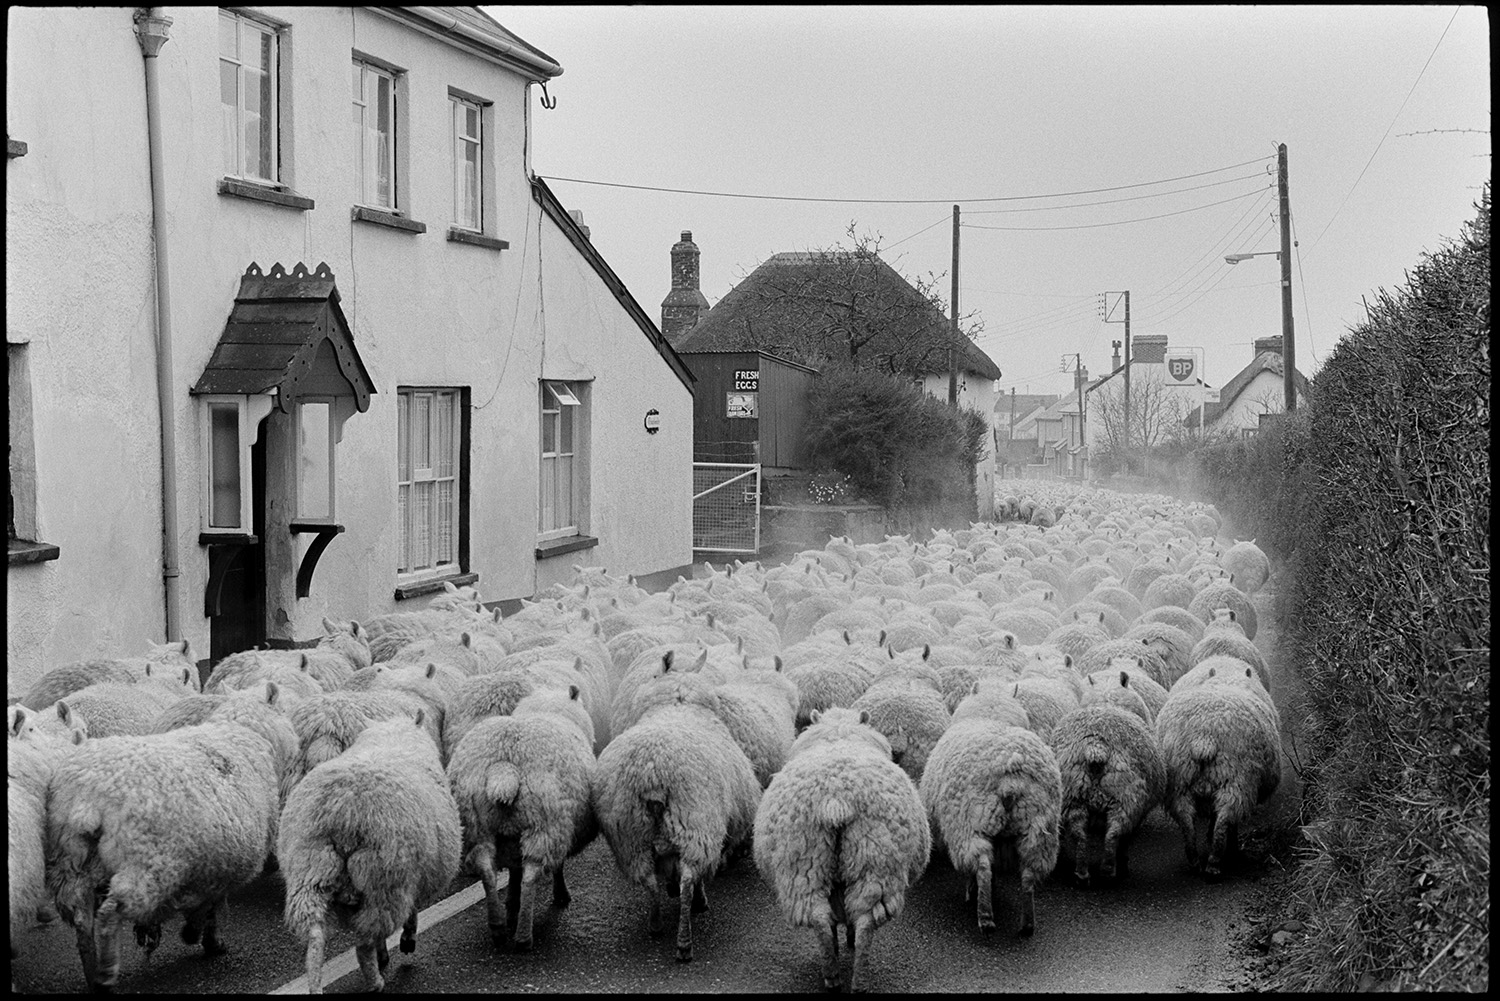 Flock of sheep in road and going through village, lorry waiting surrounded. 
[A flock of sheep being driven along a road, past cottages, in Beaford.]